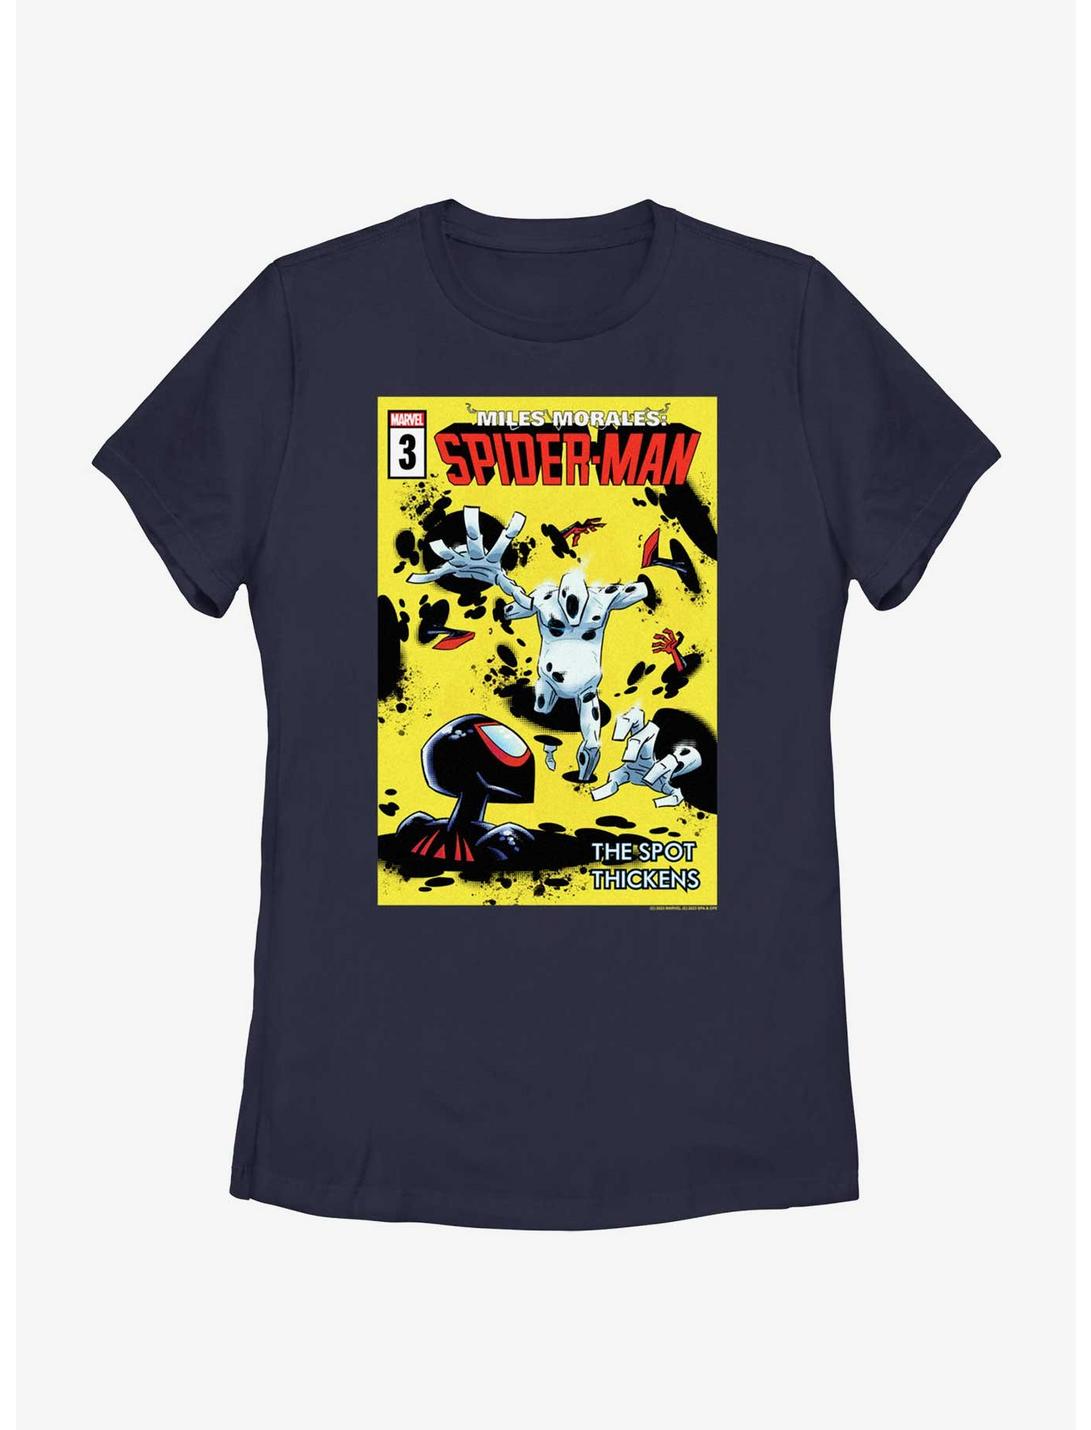 Marvel Spider-Man The Spot Thickens Poster Womens T-Shirt, NAVY, hi-res